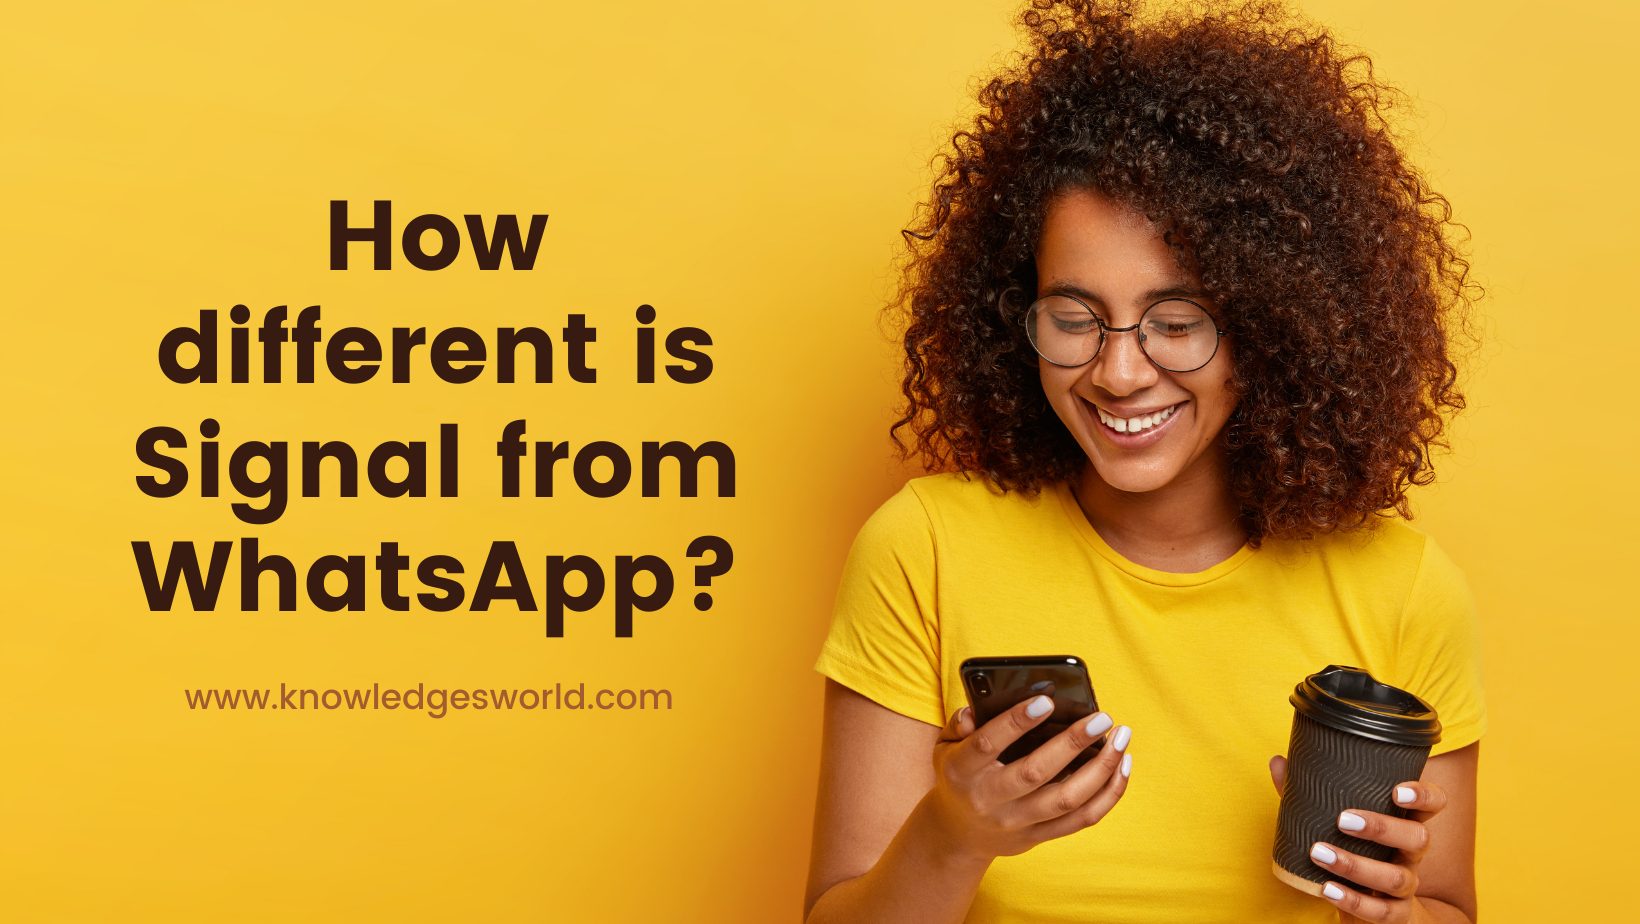 How different is Signal from WhatsApp?